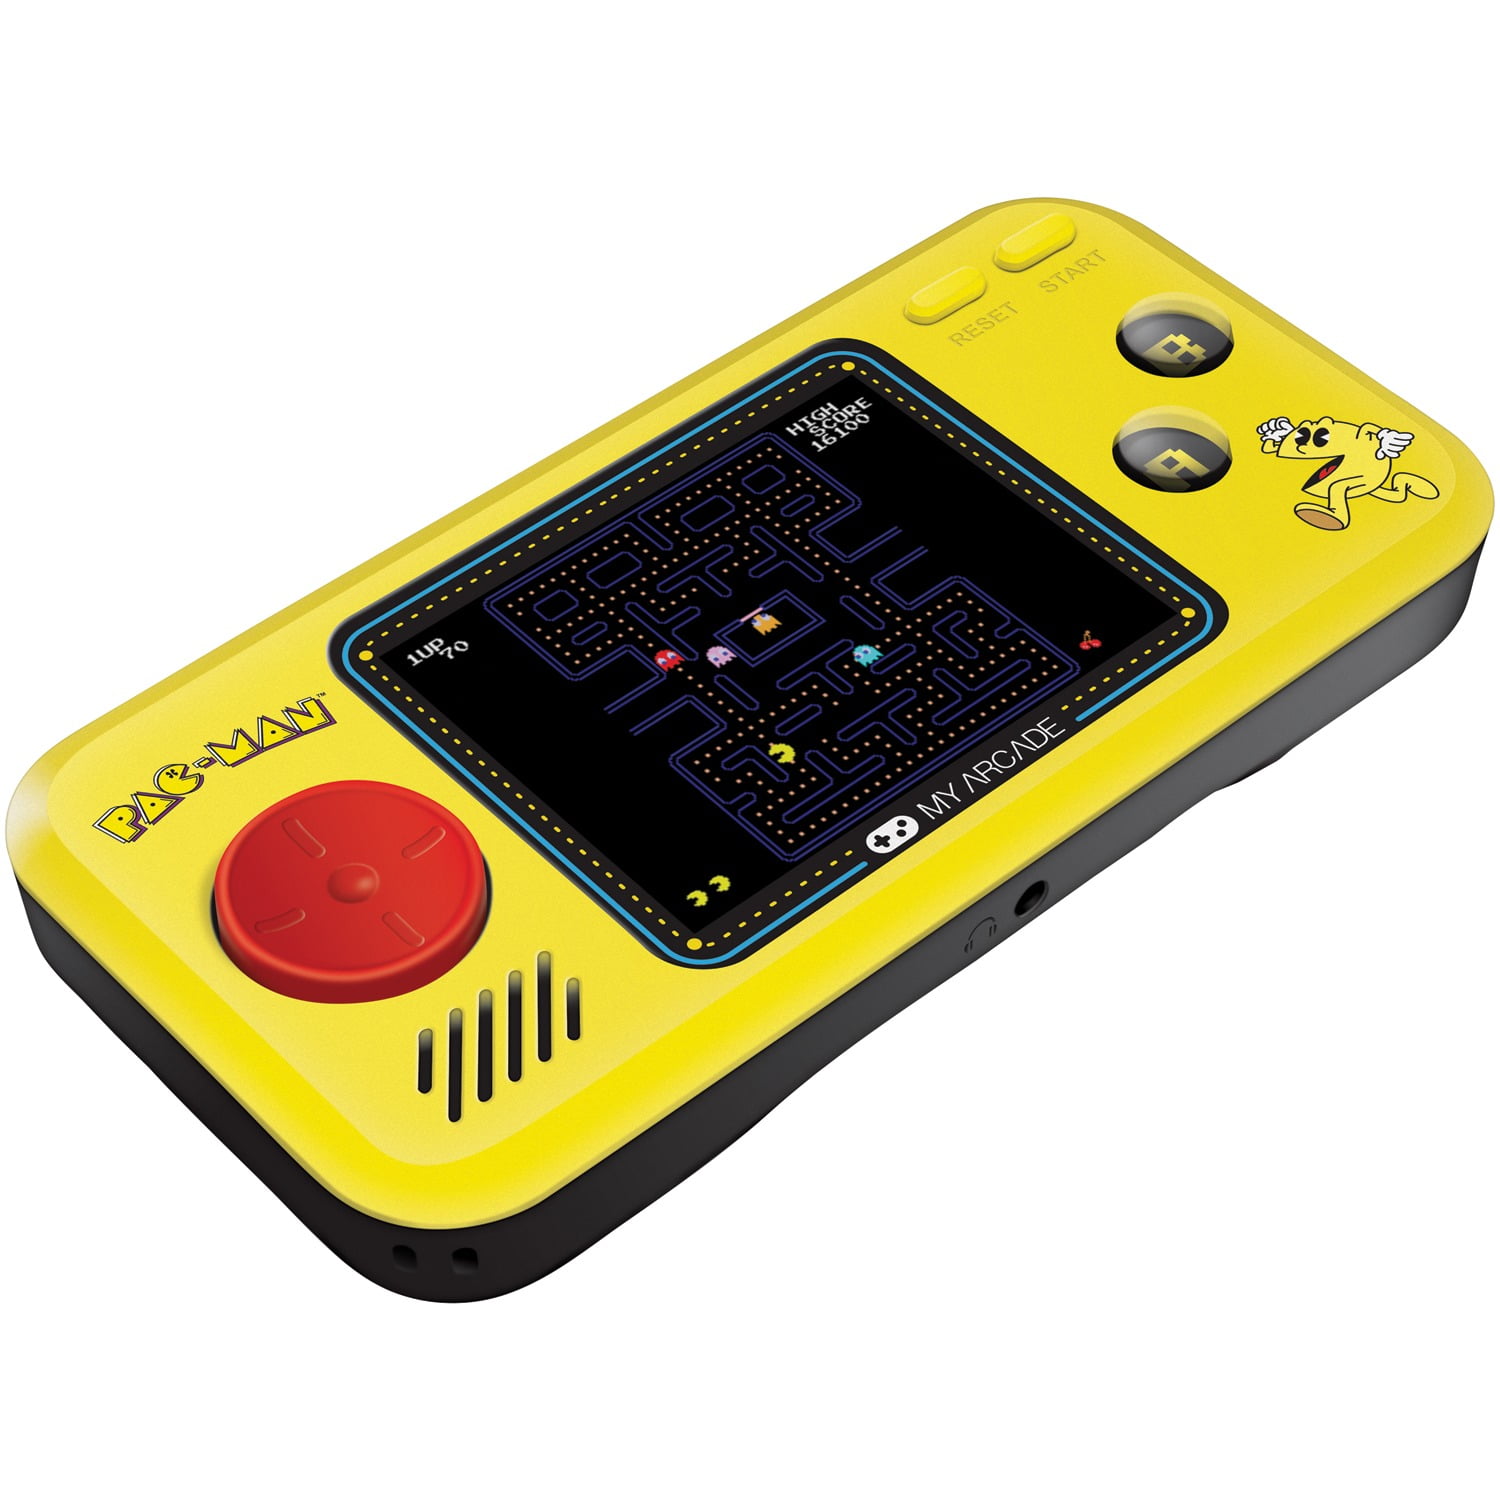 My Arcade Official PAC-MAN Pocket Player Handheld Retro Video Game Collectible 